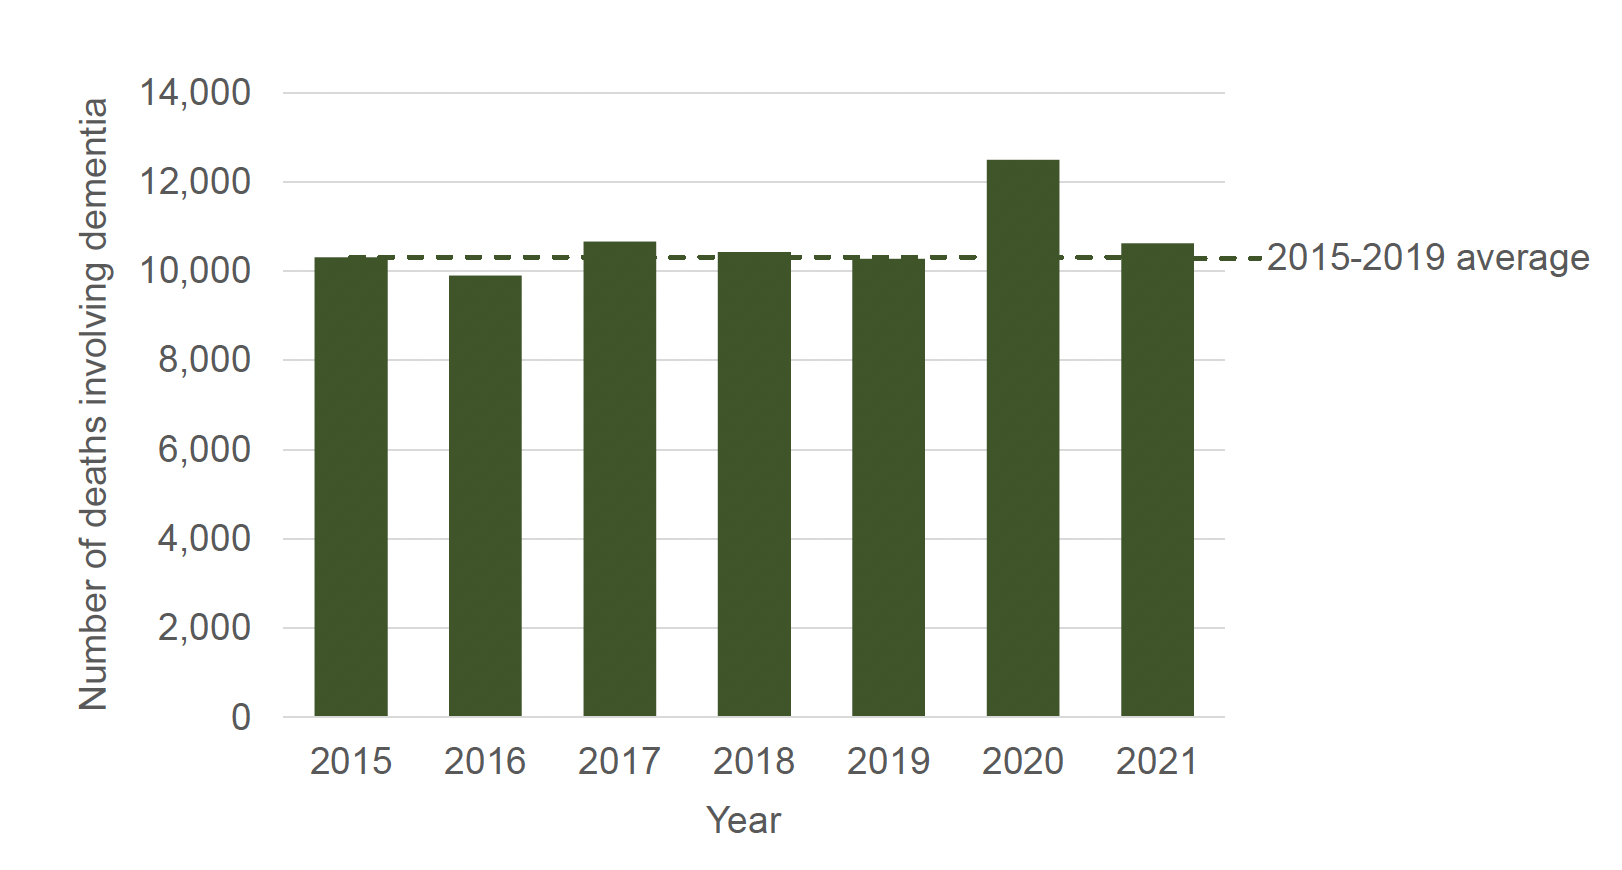 Figure 3: Column chart displaying the annual number of deaths involving dementia, Scotland 2015-2021 with a dashed line representing the 2015-2019 average.